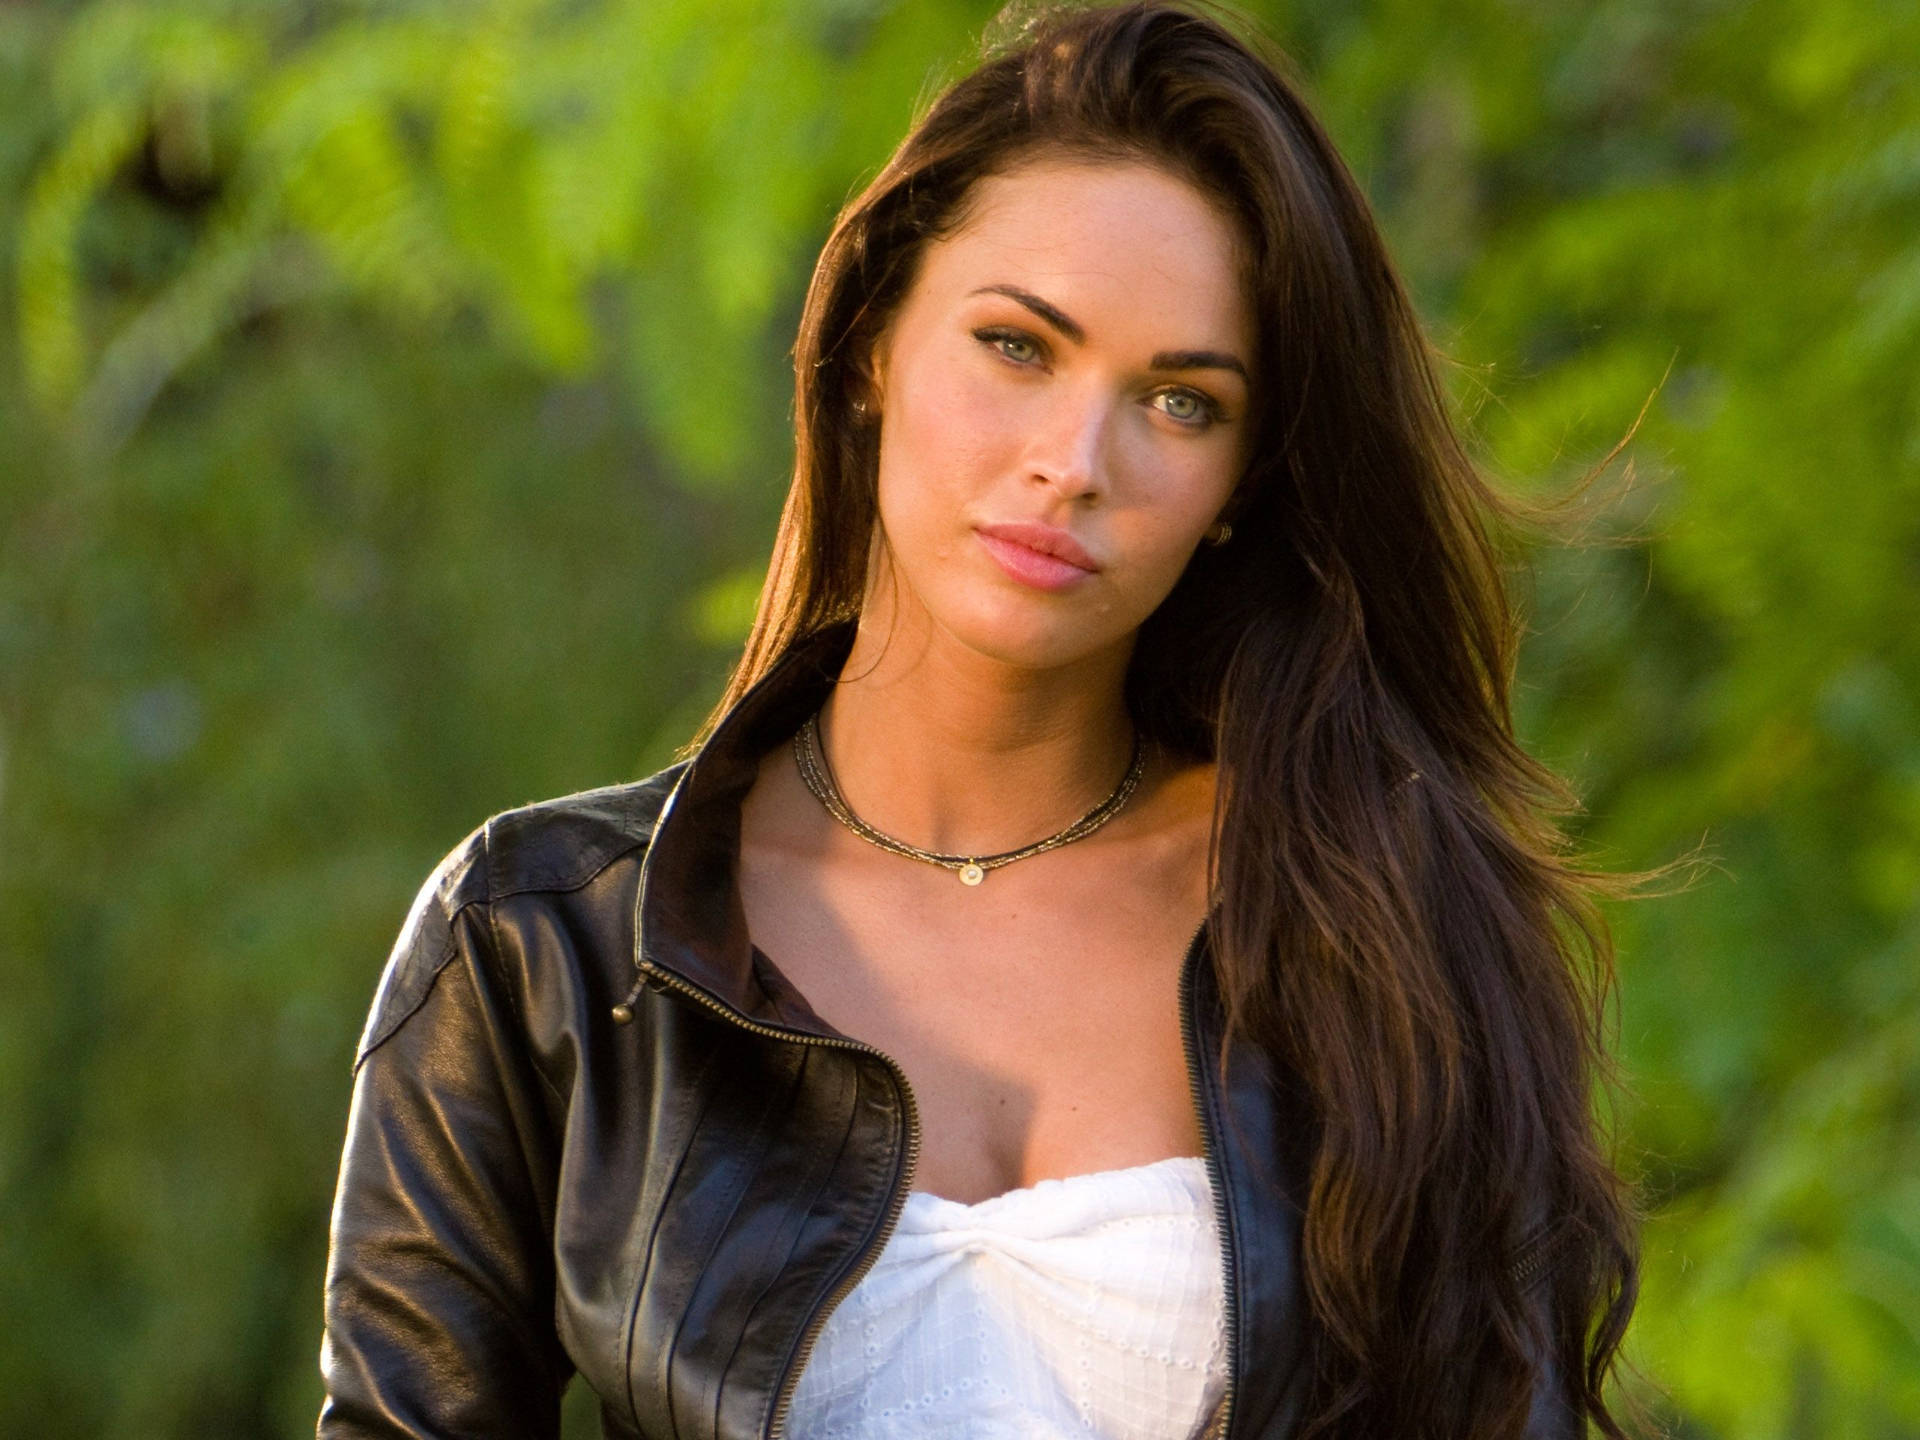 Megan Fox Looking Chic In Her Transformers 2 Leather Jacket Background